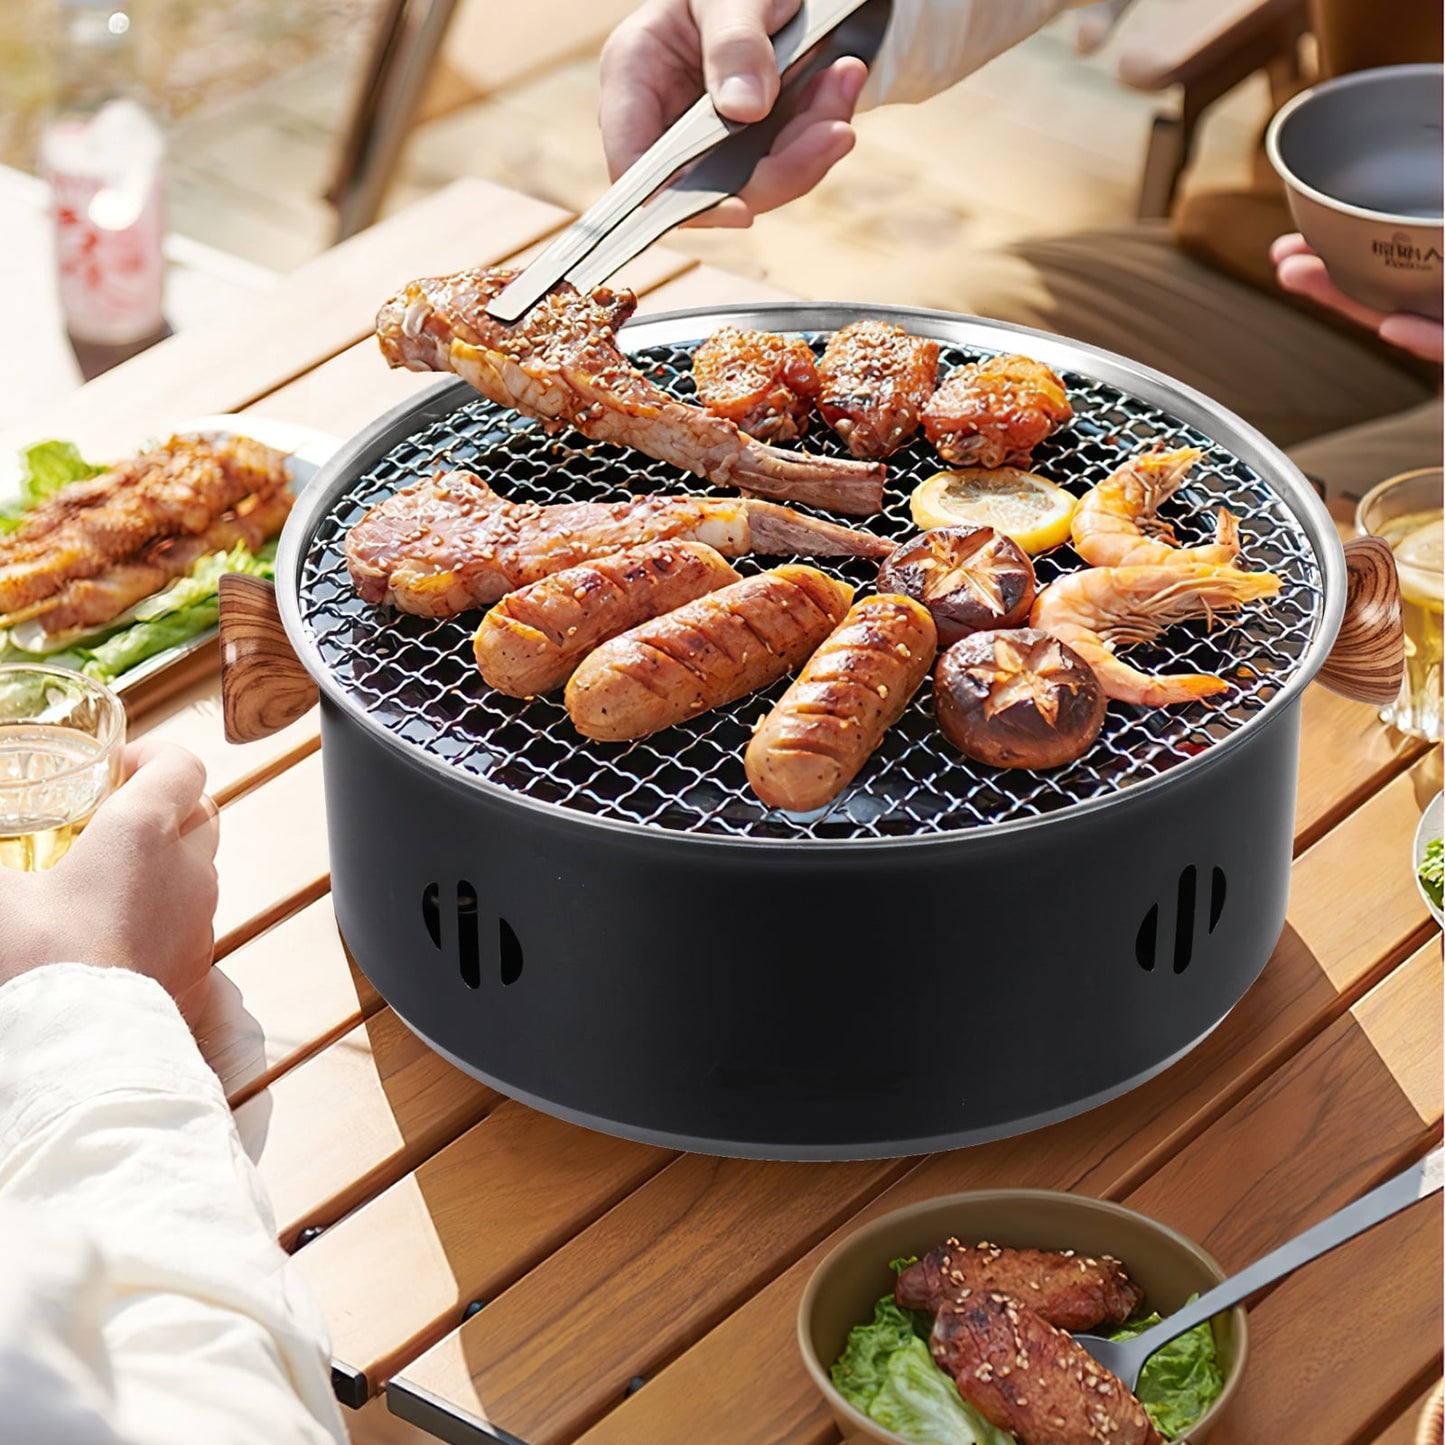 Exclusivo Mezcla 12.5-Inch Charcoal BBQ Grill, Portable Small Camping Grill, Tabletop Korean Barbecue Grill for Home Party and Outdoor Backyard Cooking, Black